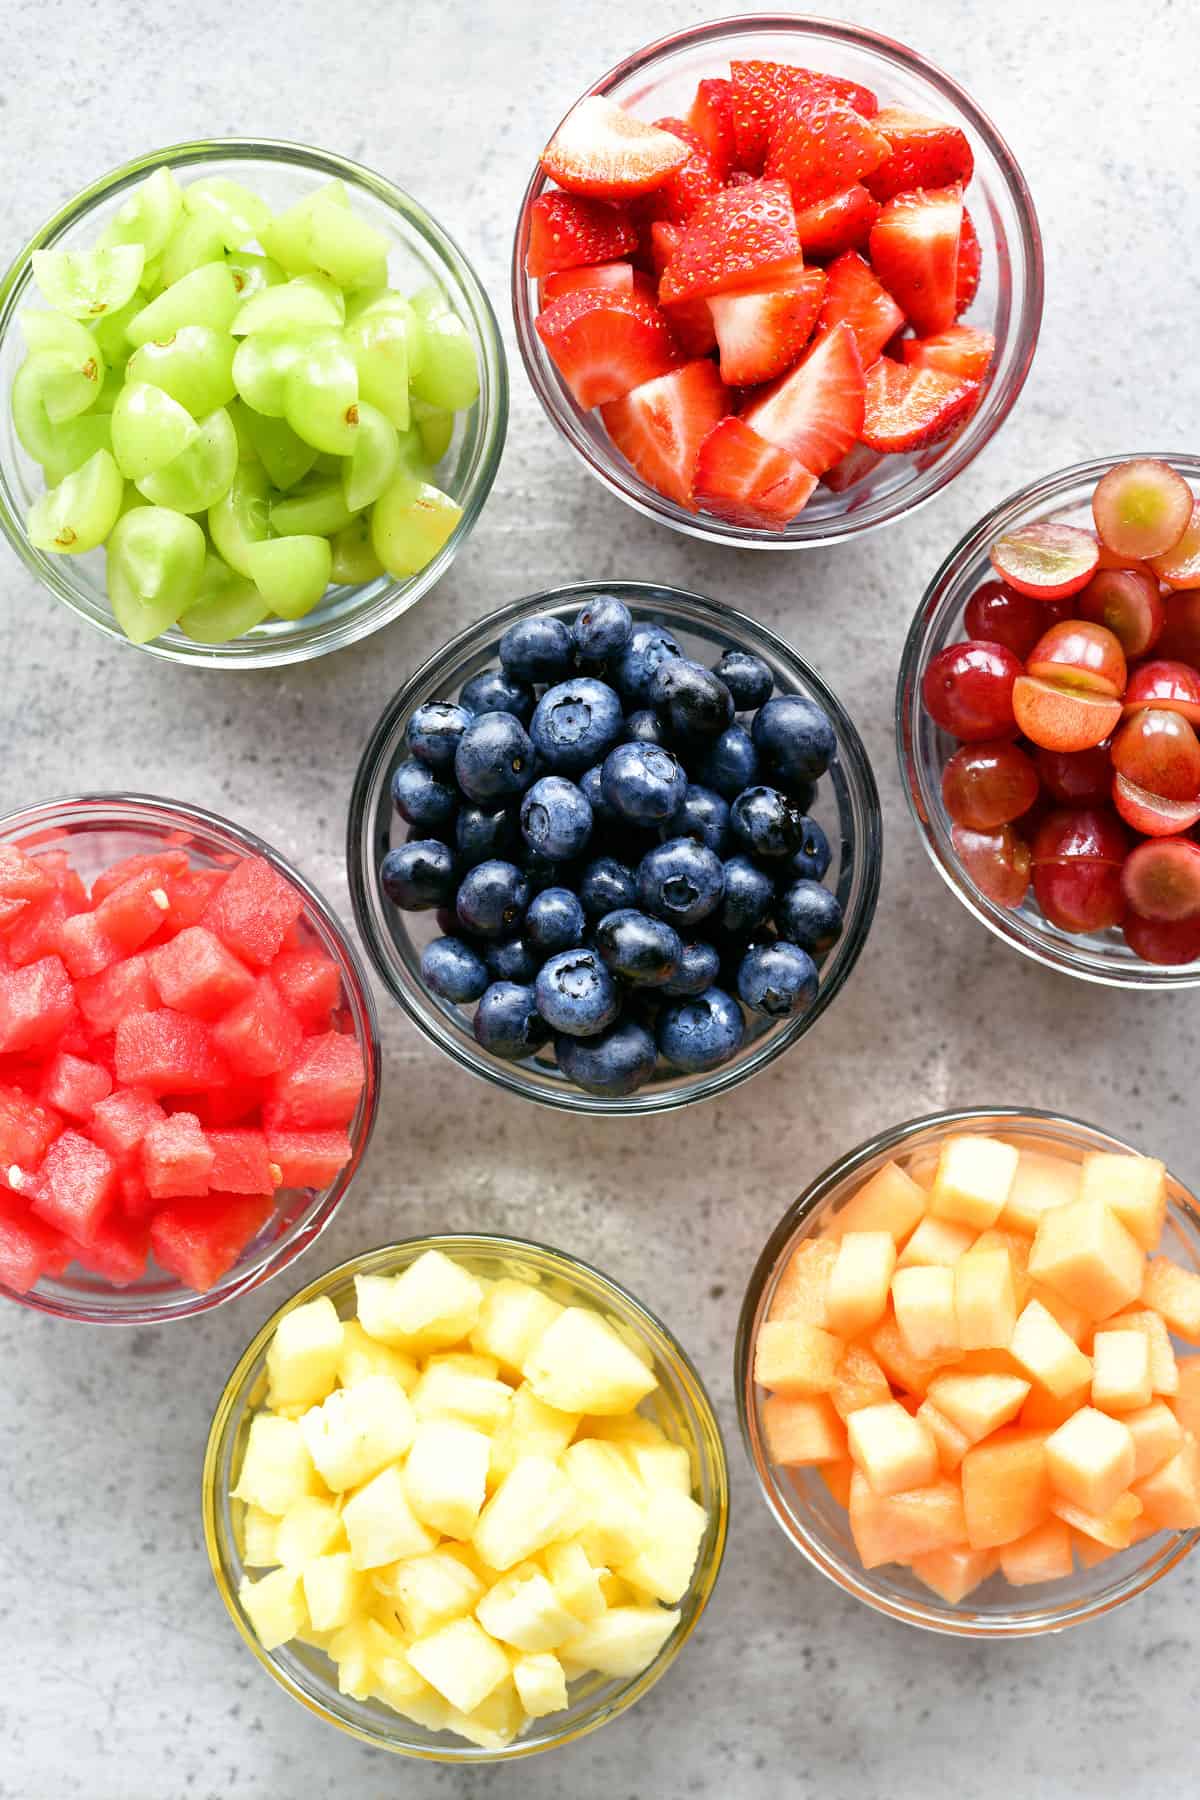 Sliced grapes, diced melon, pineapple tidbits, strawberries, and blueberries in bowls.